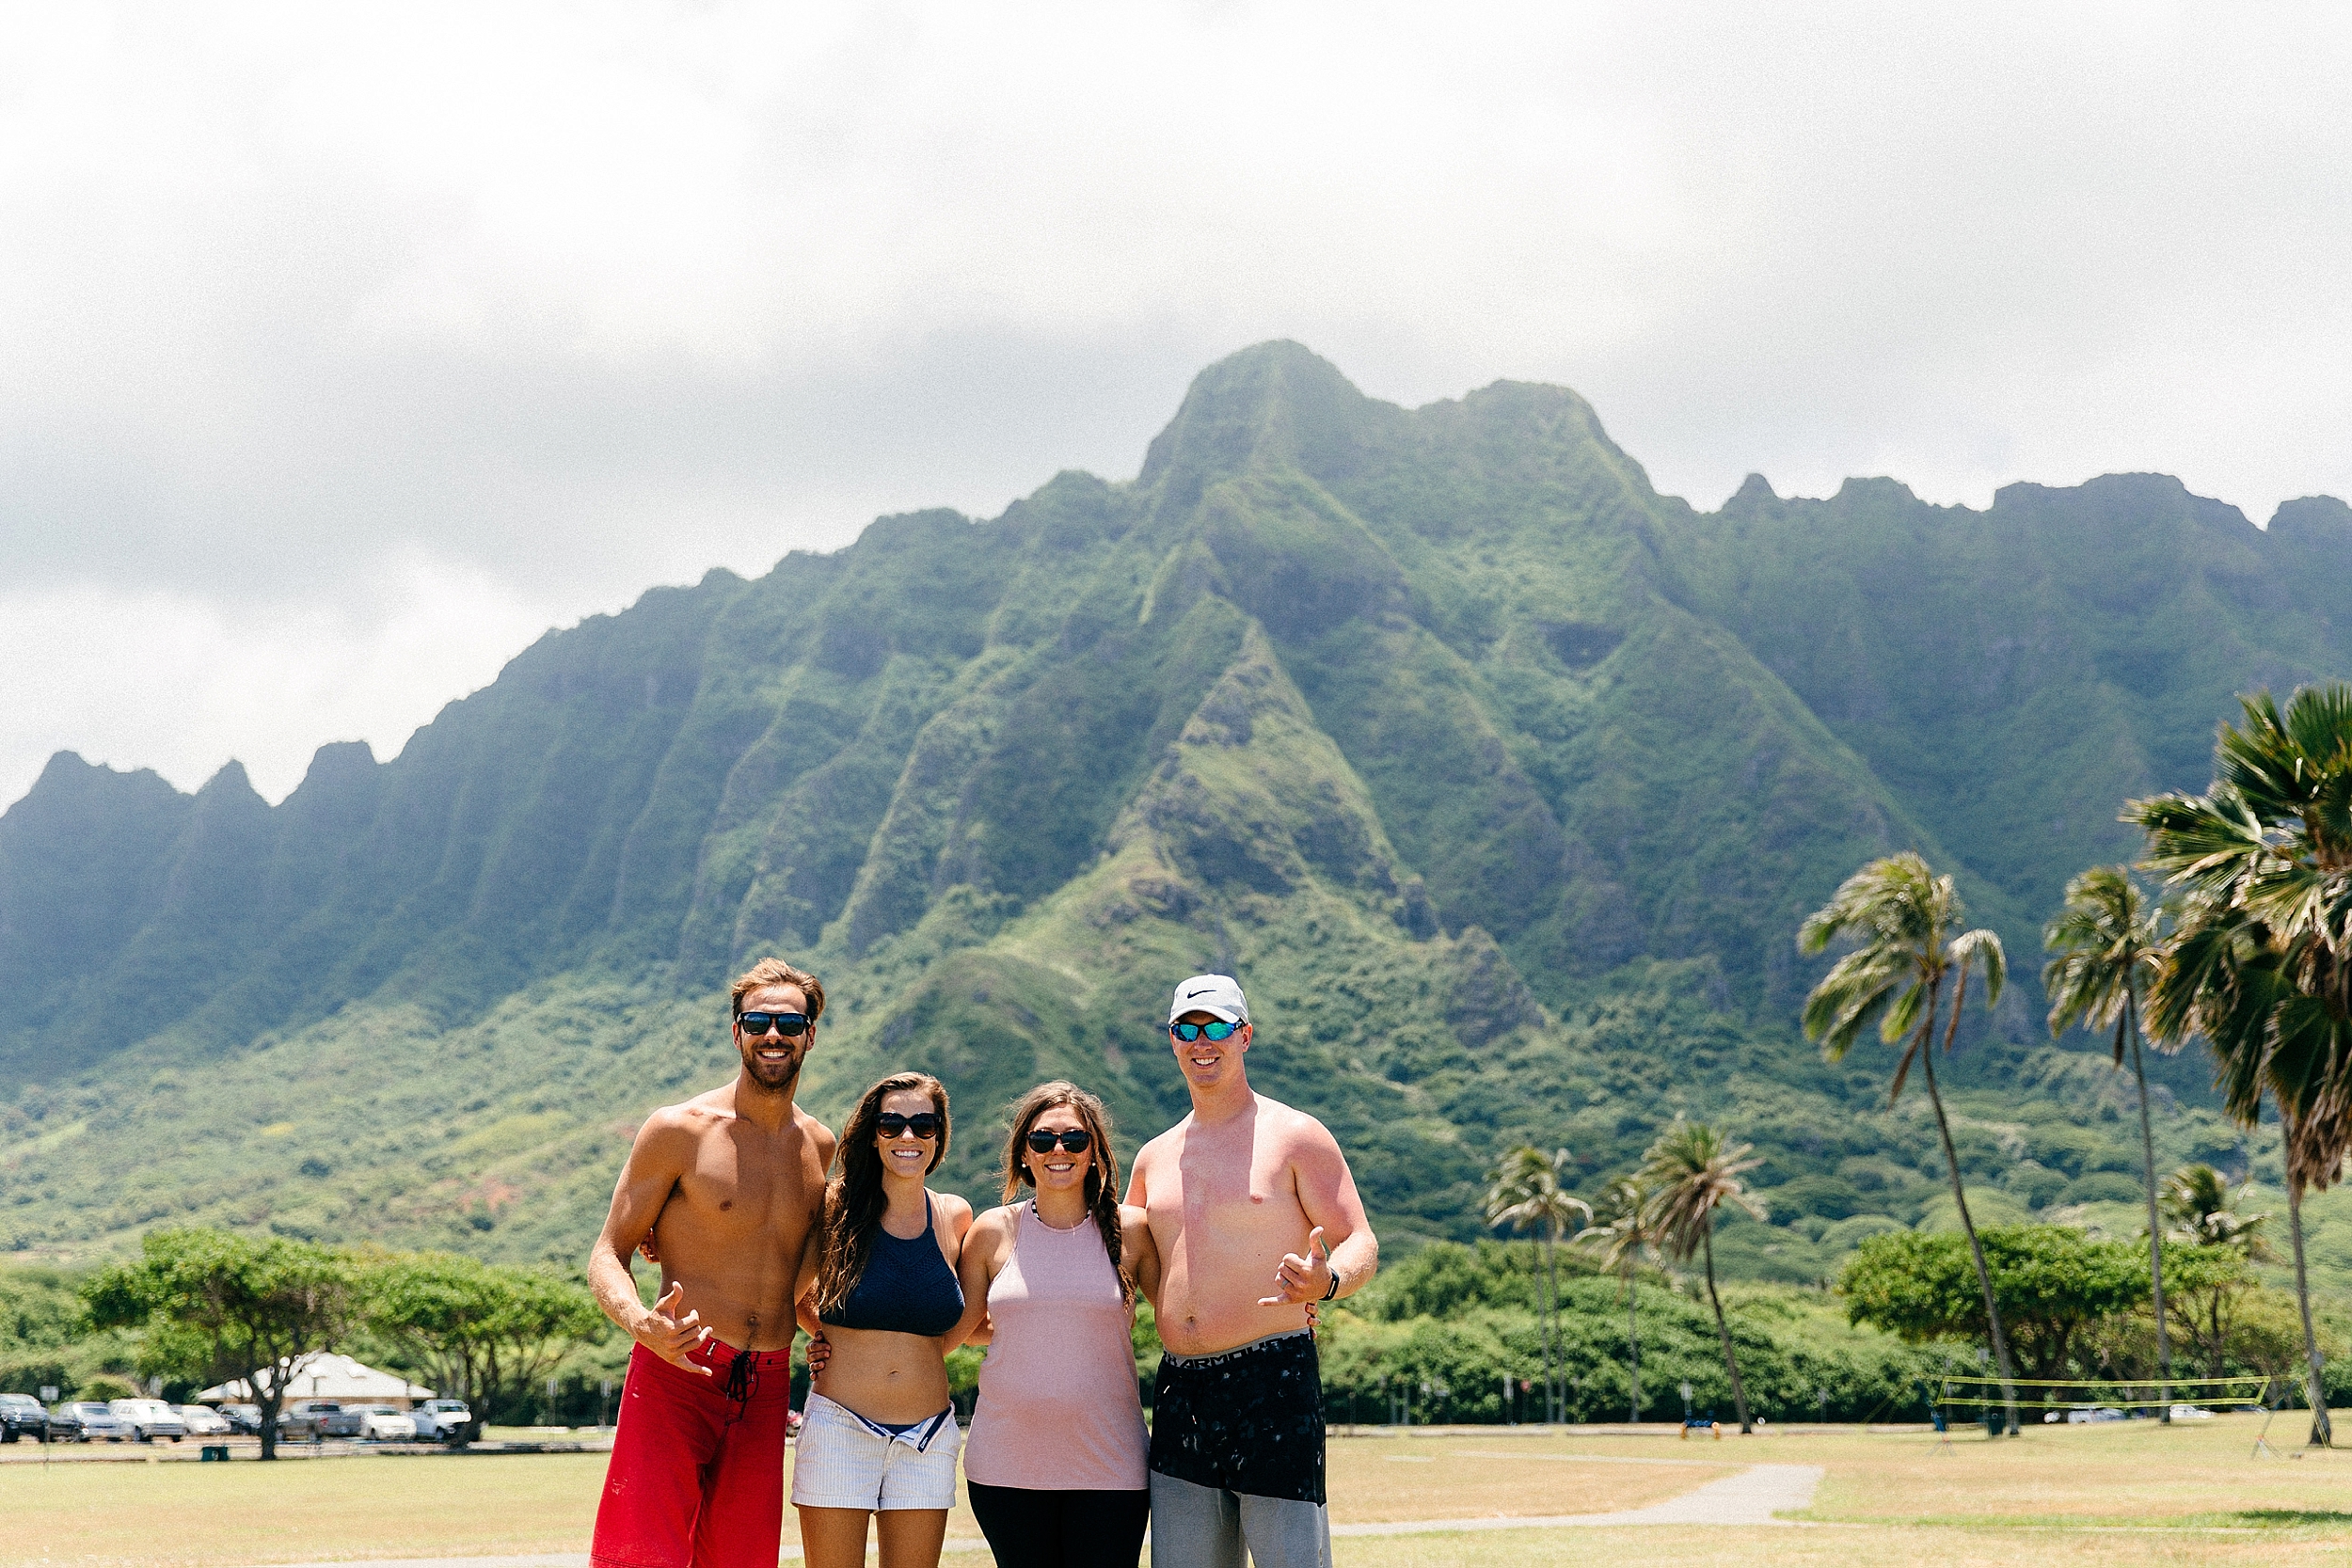  Our Life in Hawaii - June Journal 